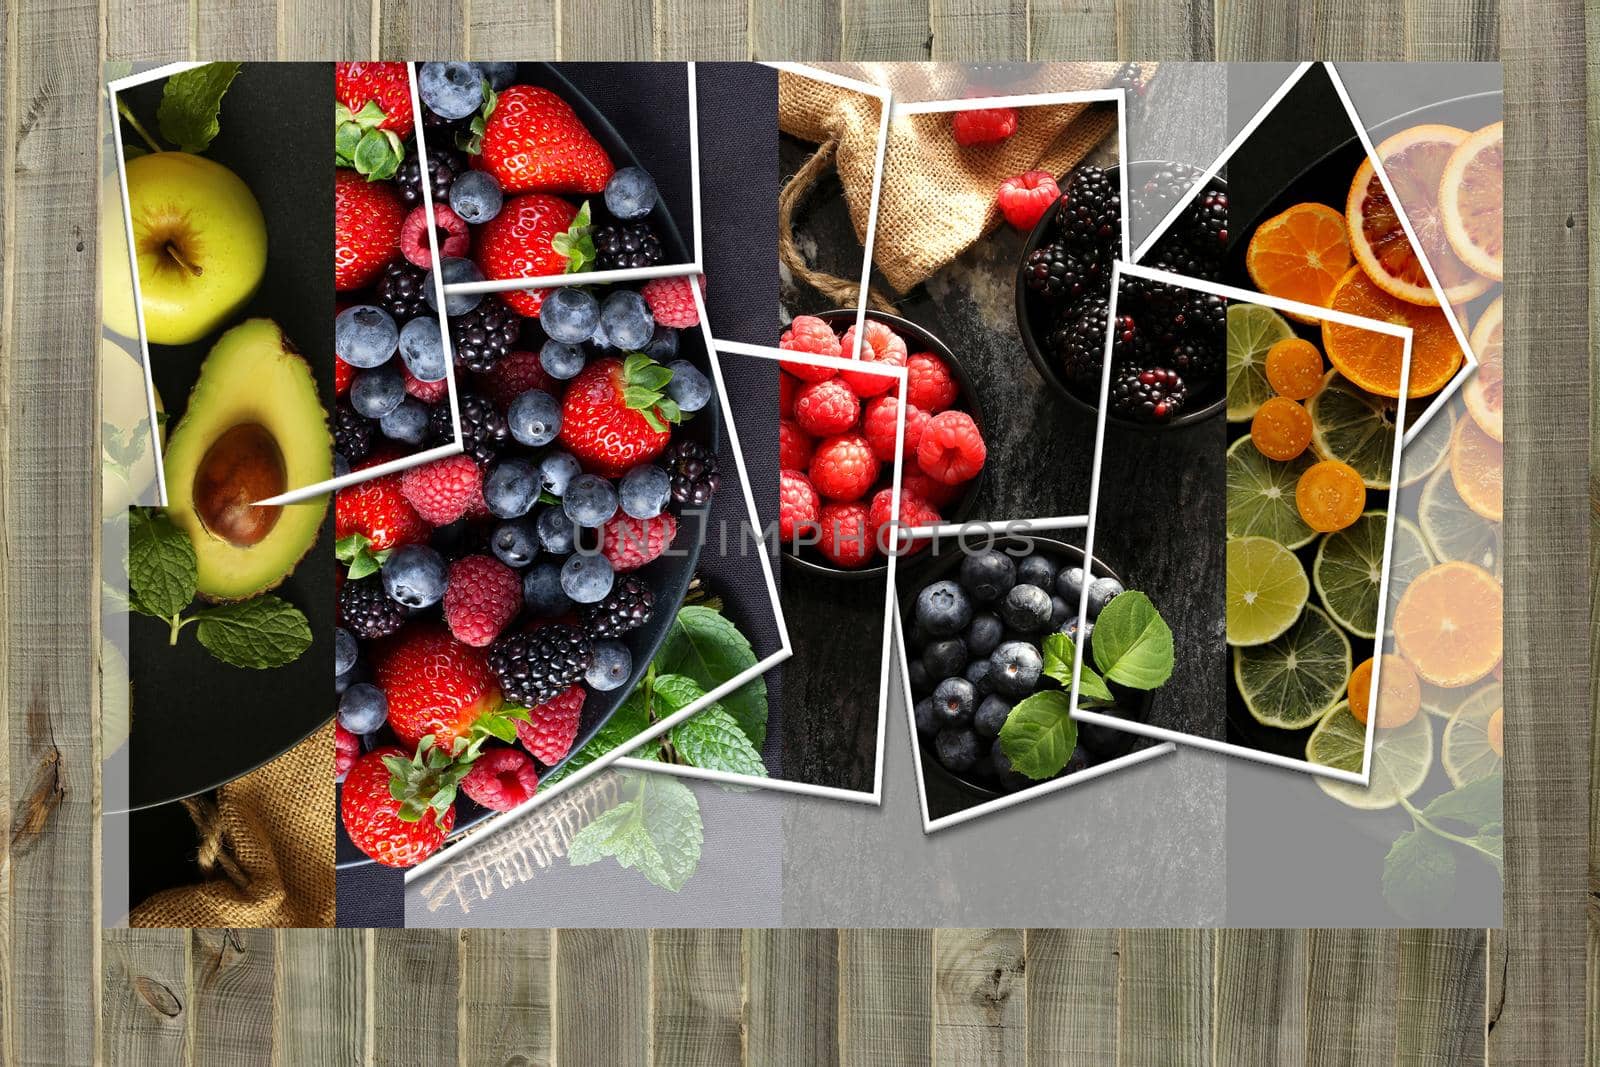 Collage of summer fruits and berries on wooden background. Healthy, vegetarian food concept. Mock up